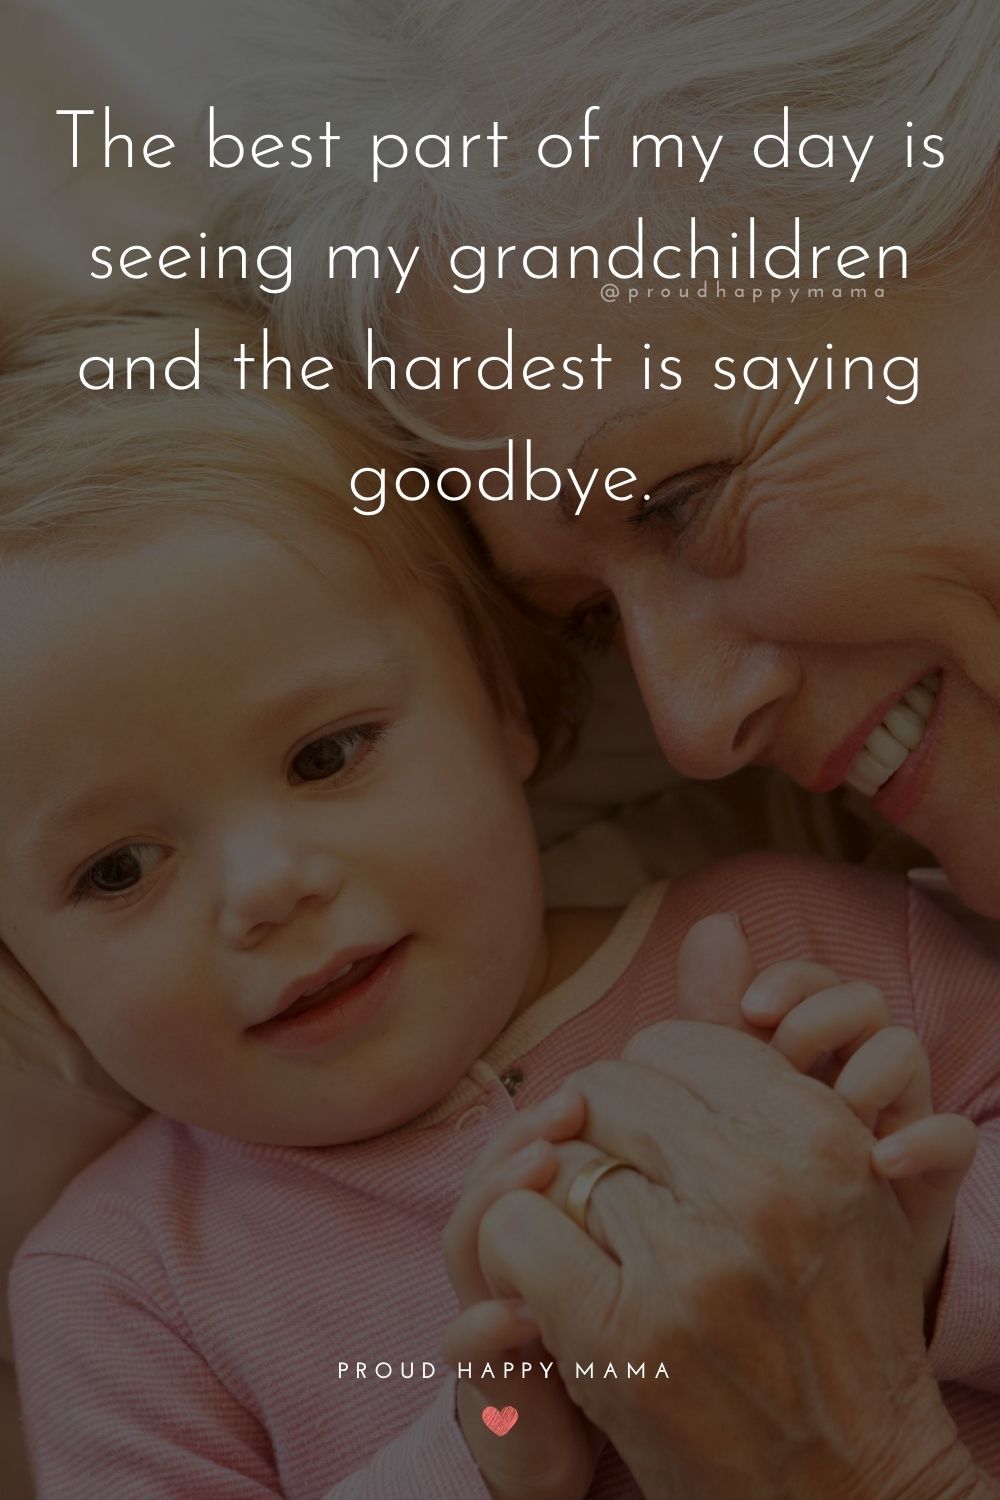 Quote About Grandchildren - The best part of my day is seeing my grandchildren and the hardest is saying goodbye.